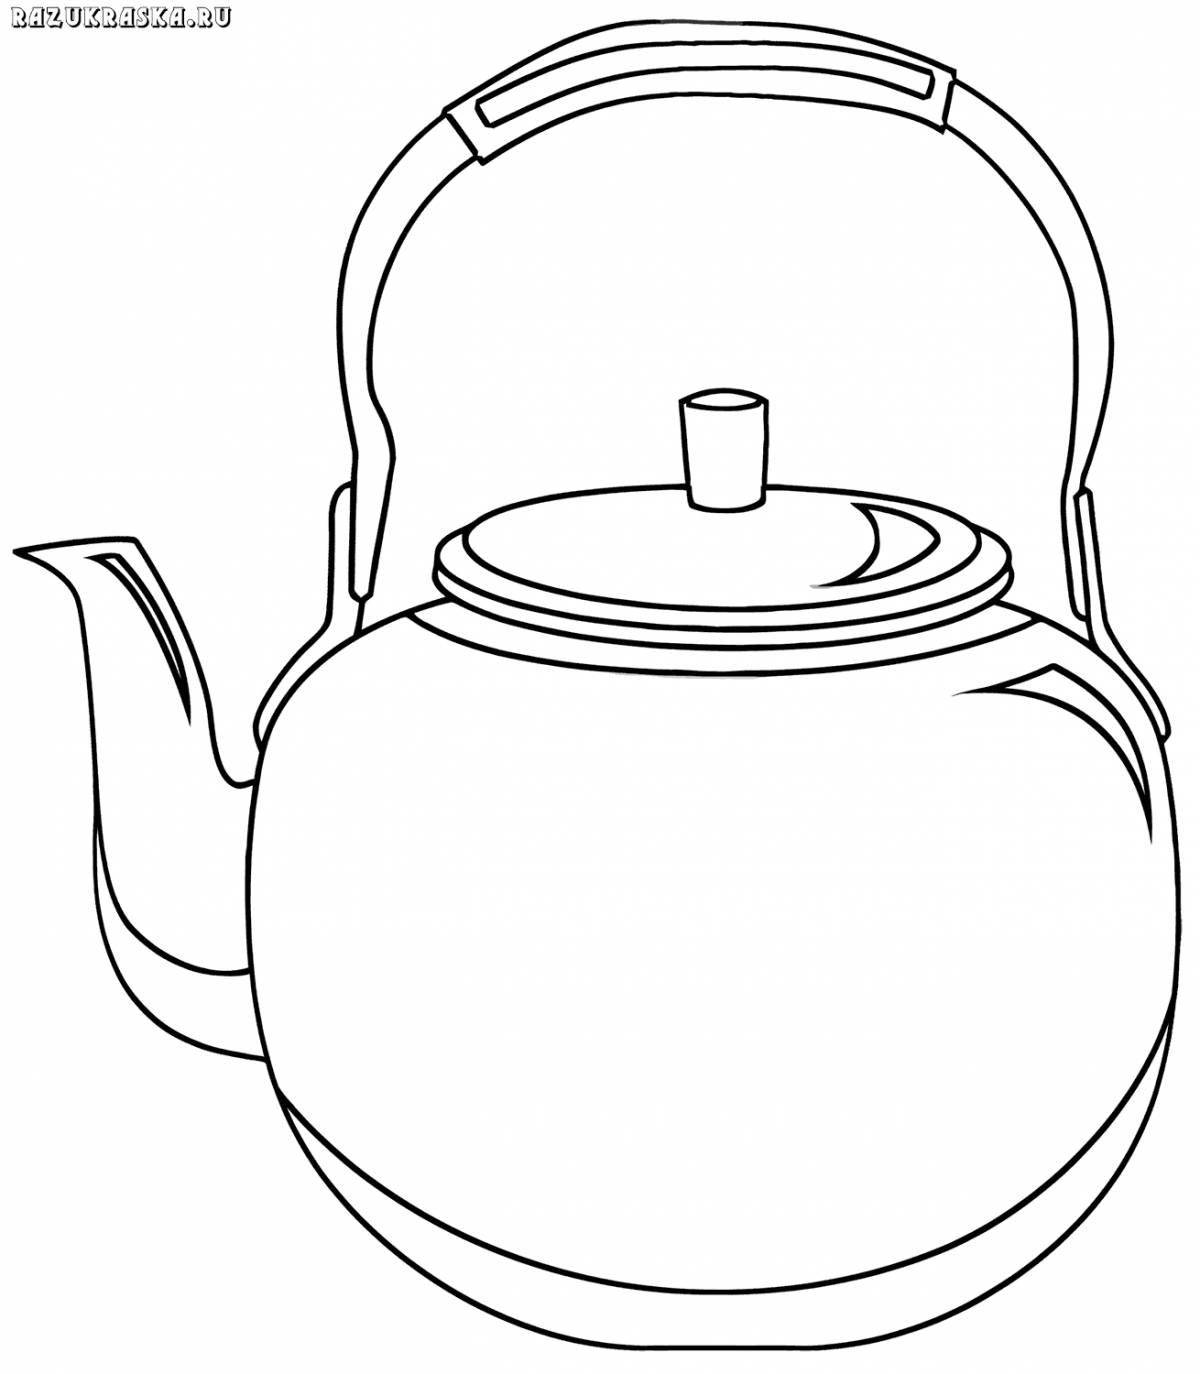 Fabulous teapot coloring book for 2-3 year olds